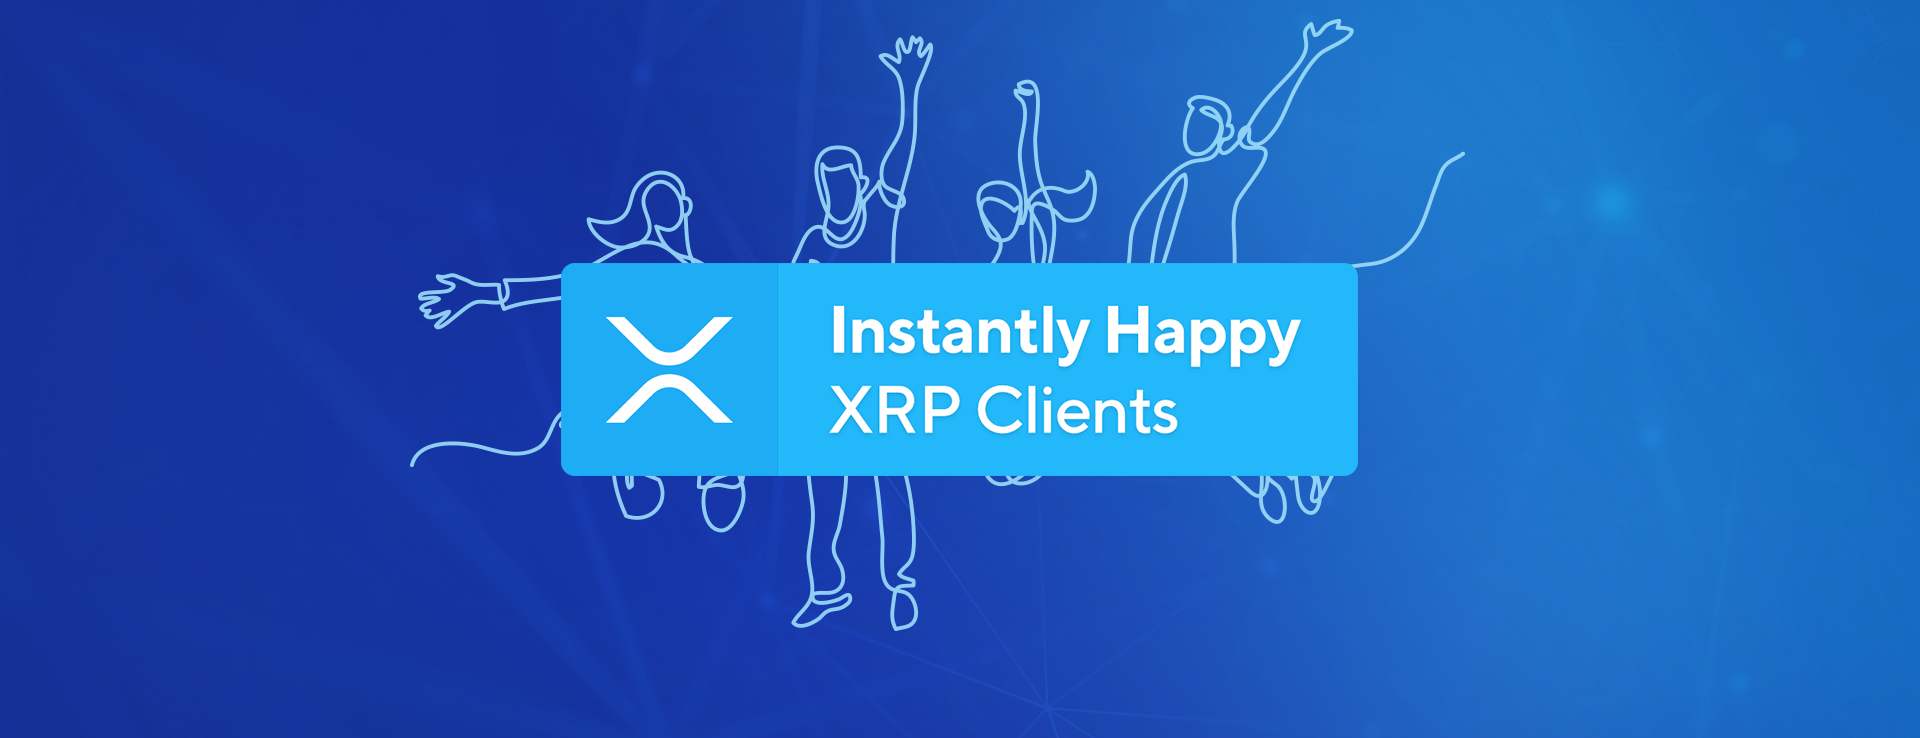 Instantly Happy XRP Clients